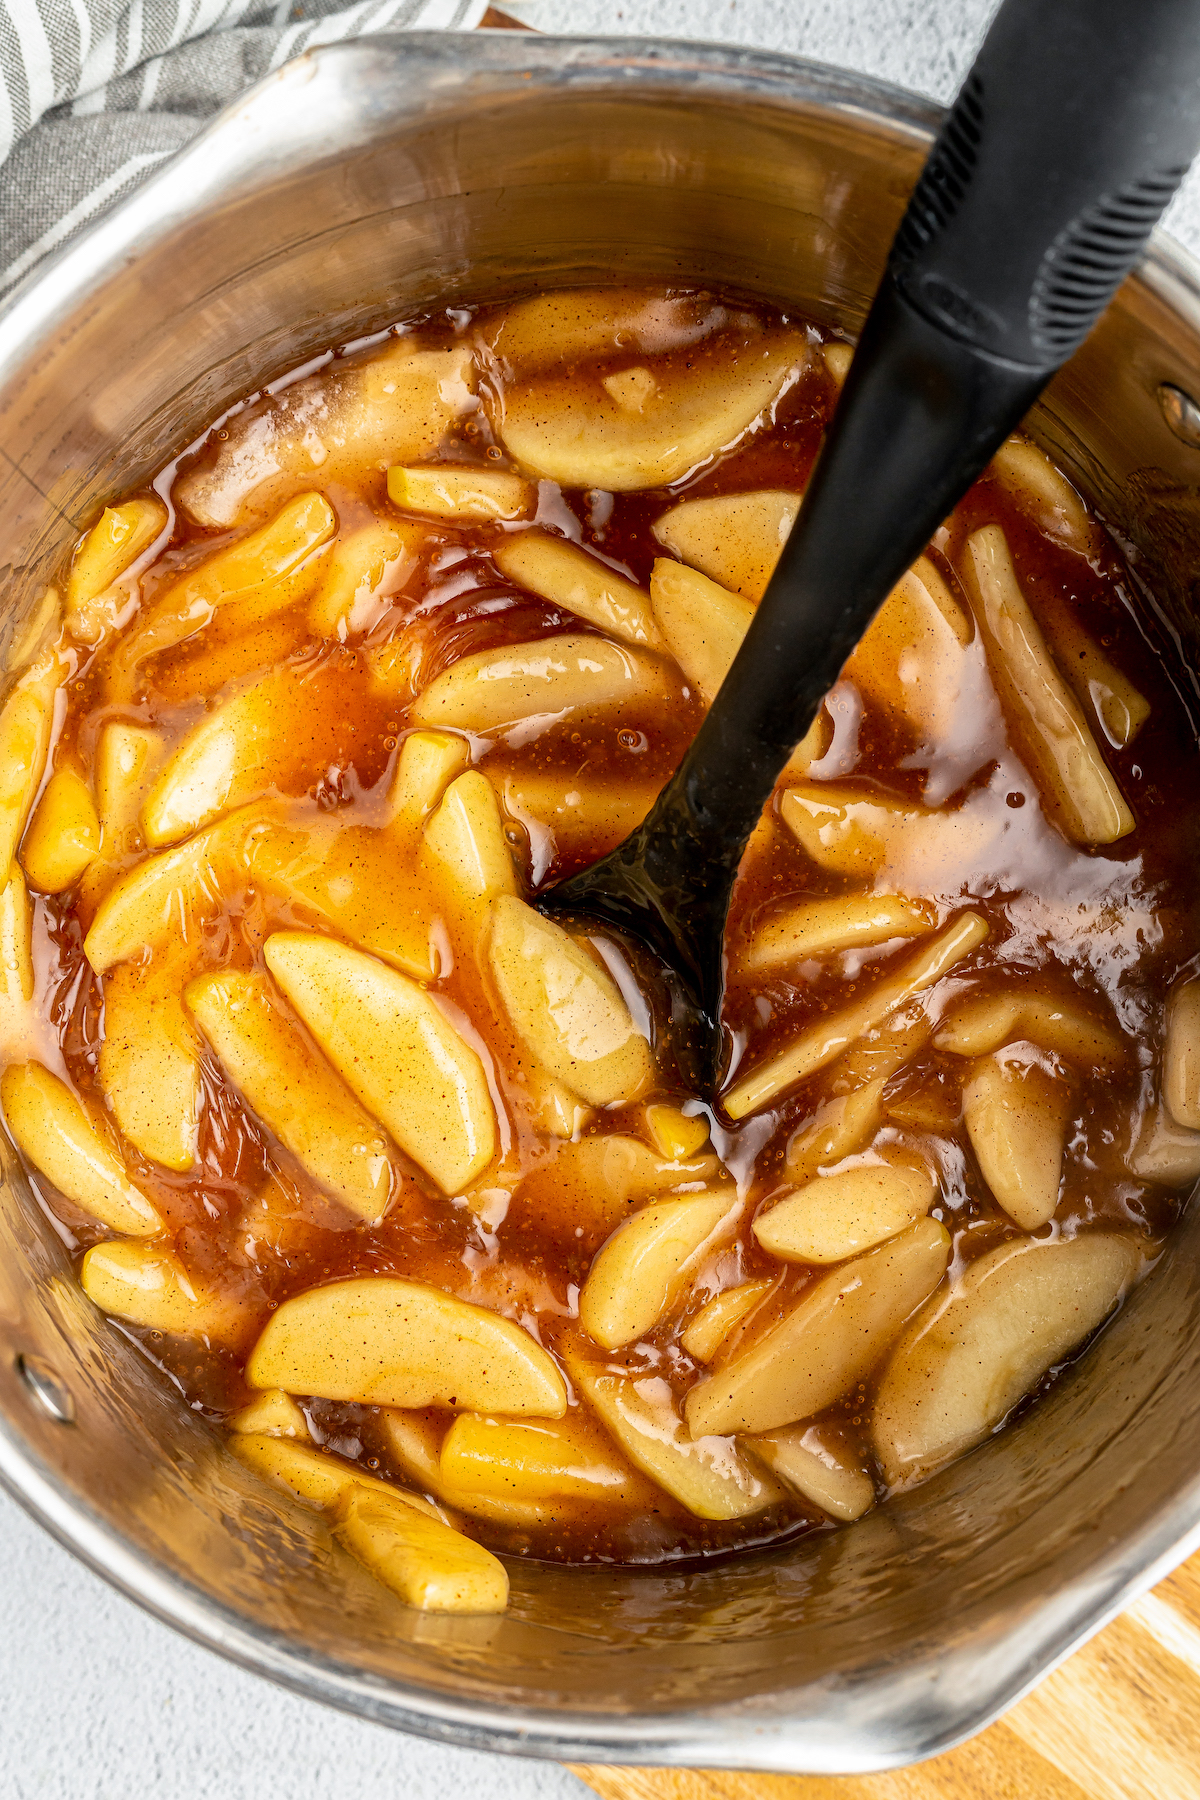 Apple slices in a large metal pot with simmering sauce.